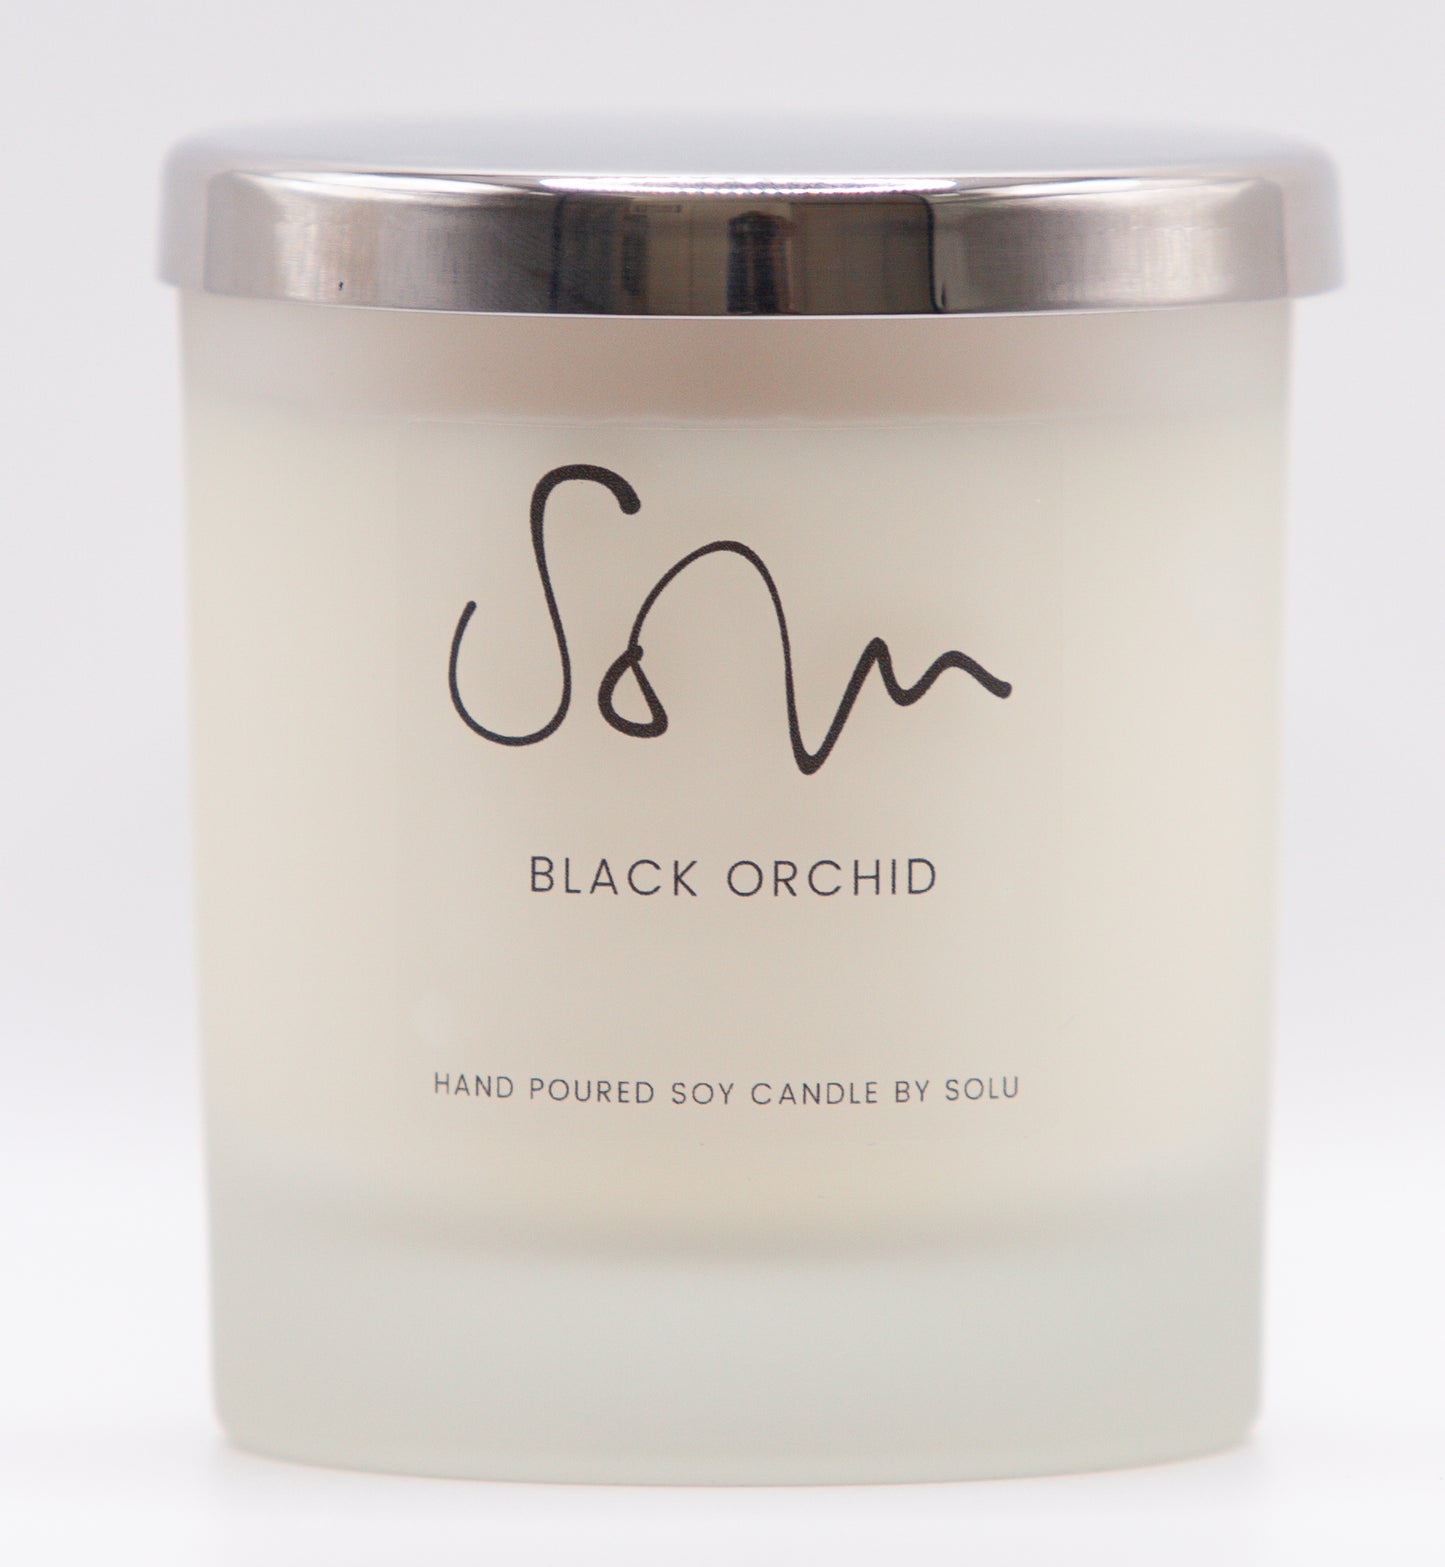 Black Orchid Soy Wax Candle - Solu Candles